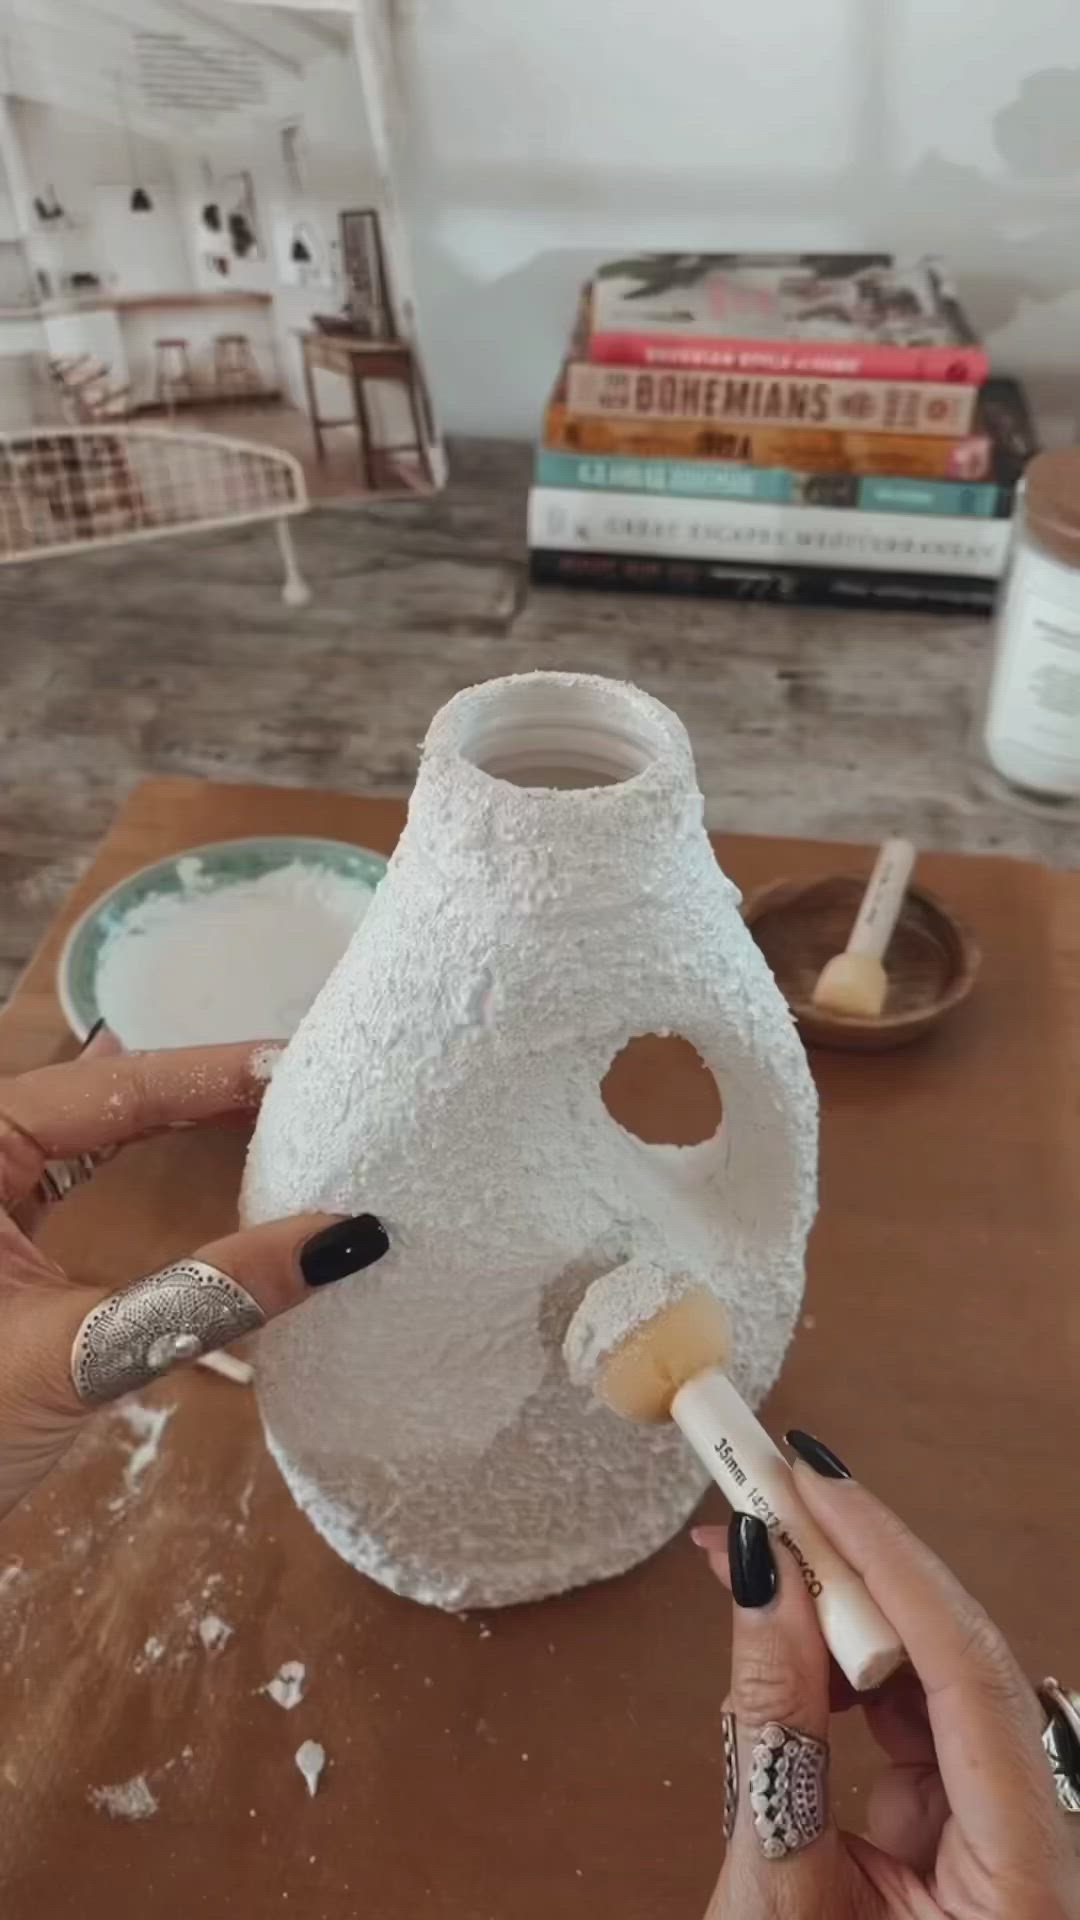 This may contain: two hands are painting a white vase on a table